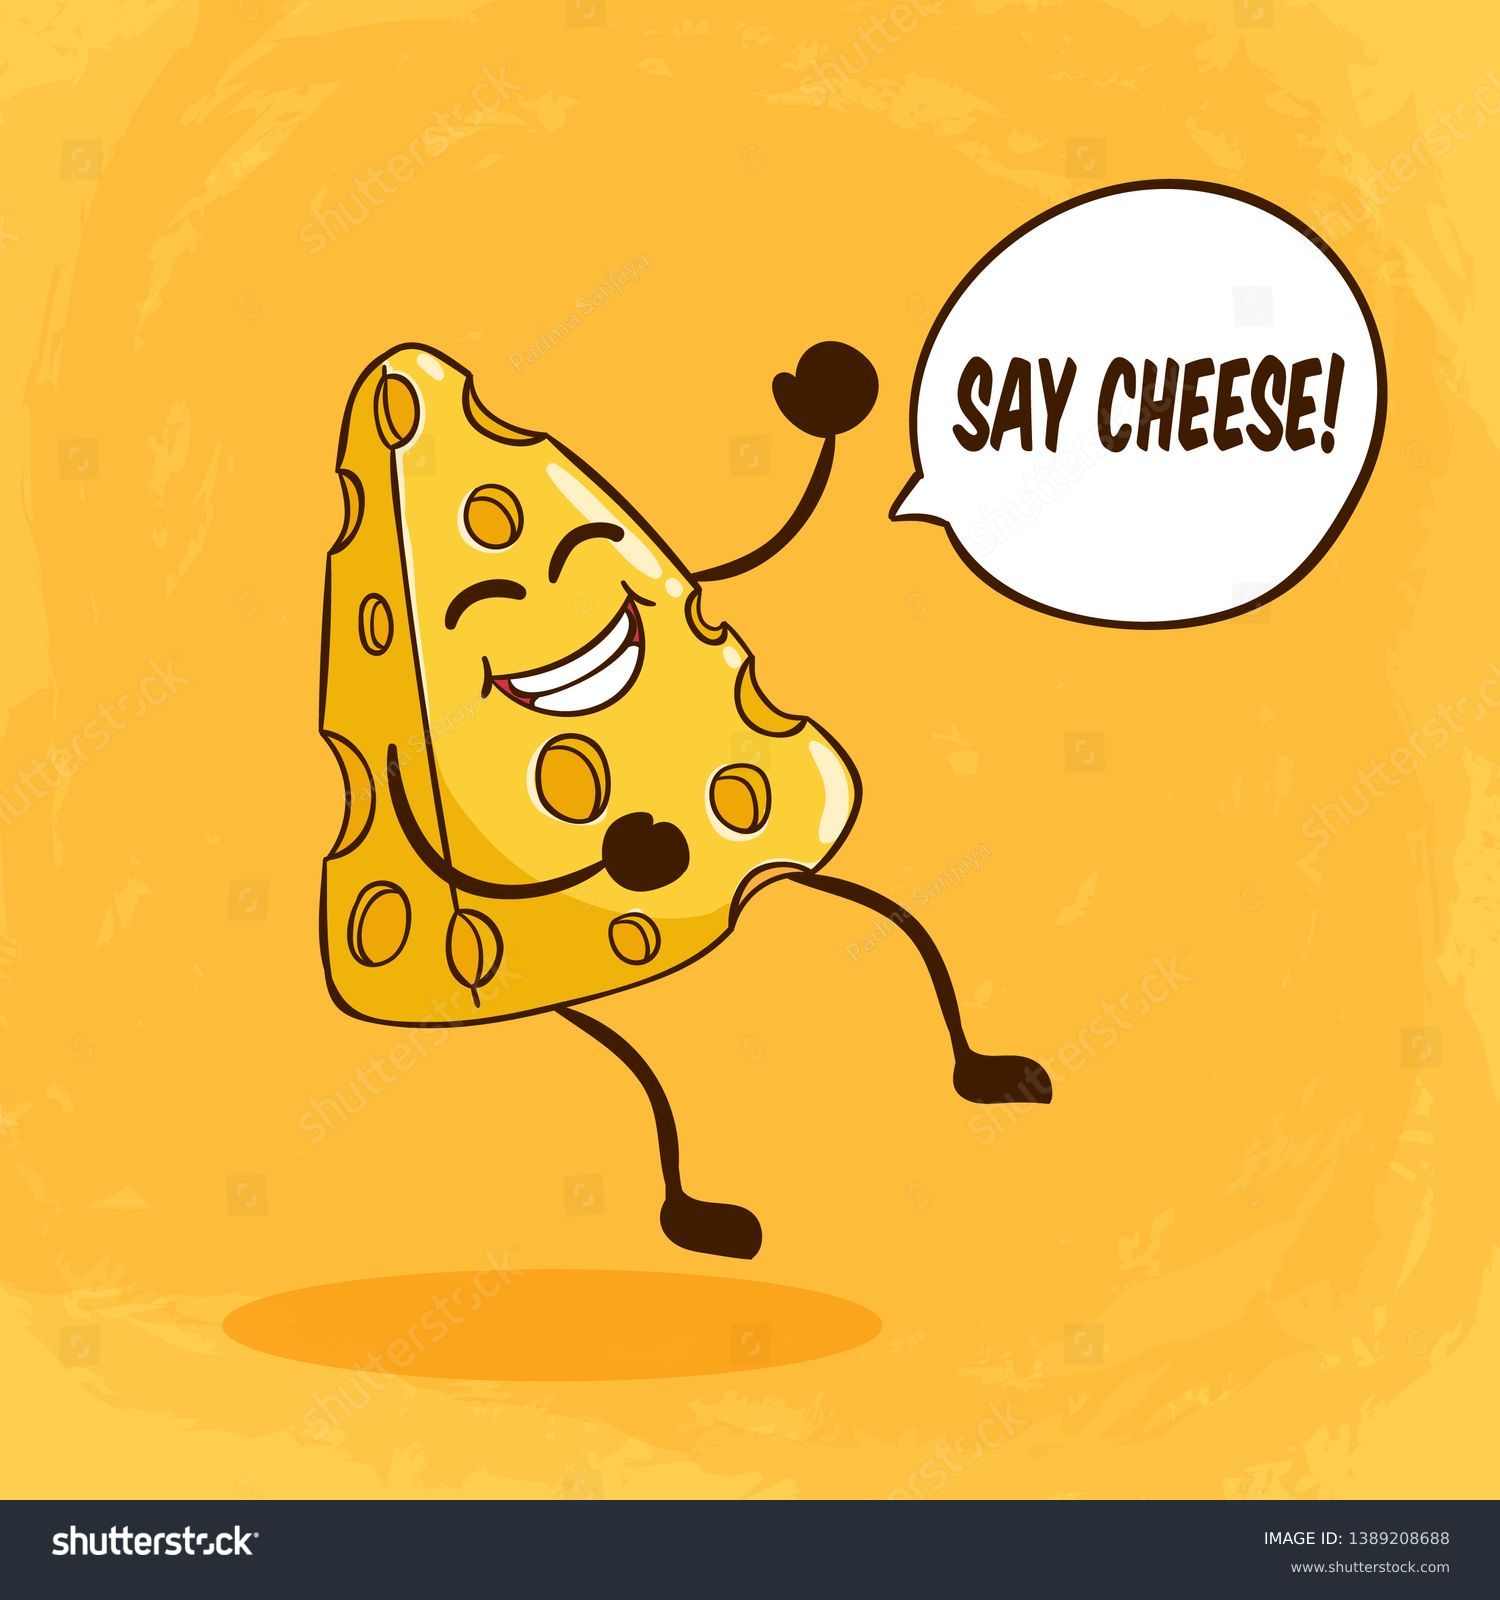 SVG of Cute cheese character with funny face or expression and say cheese lettering on orange background svg